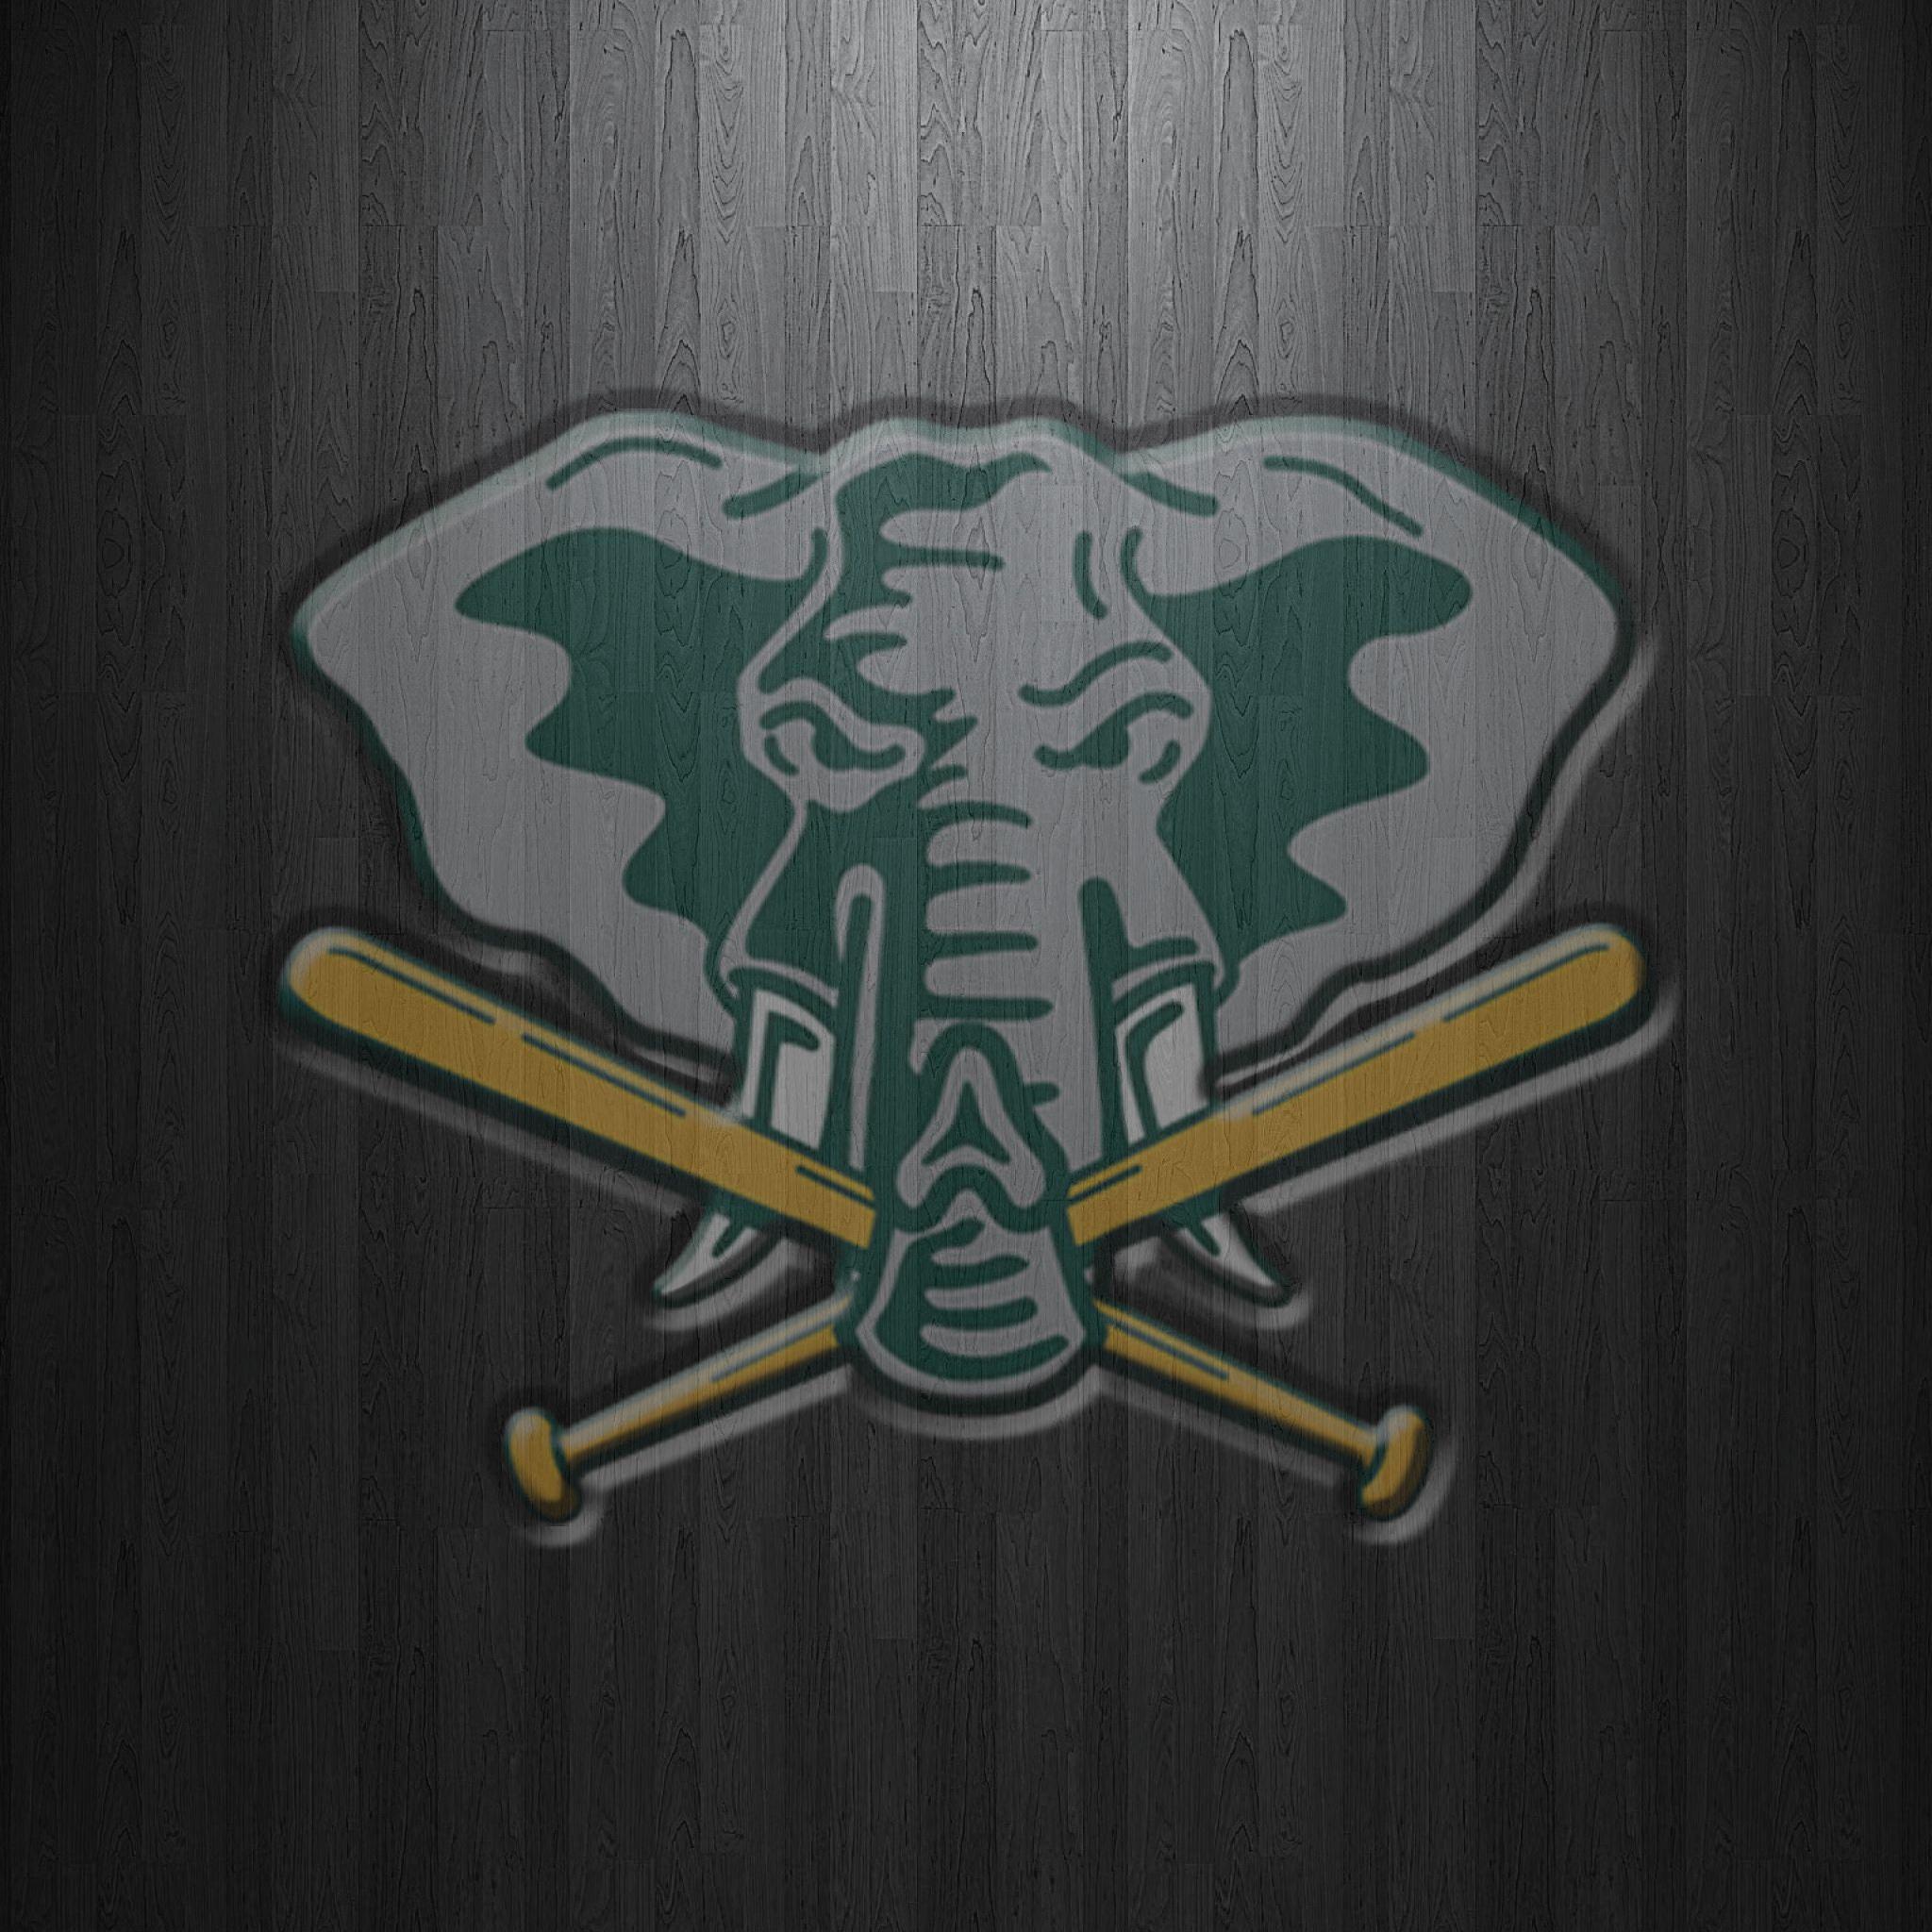 Oakland Athletics wallpaper by eddy0513 - Download on ZEDGE™